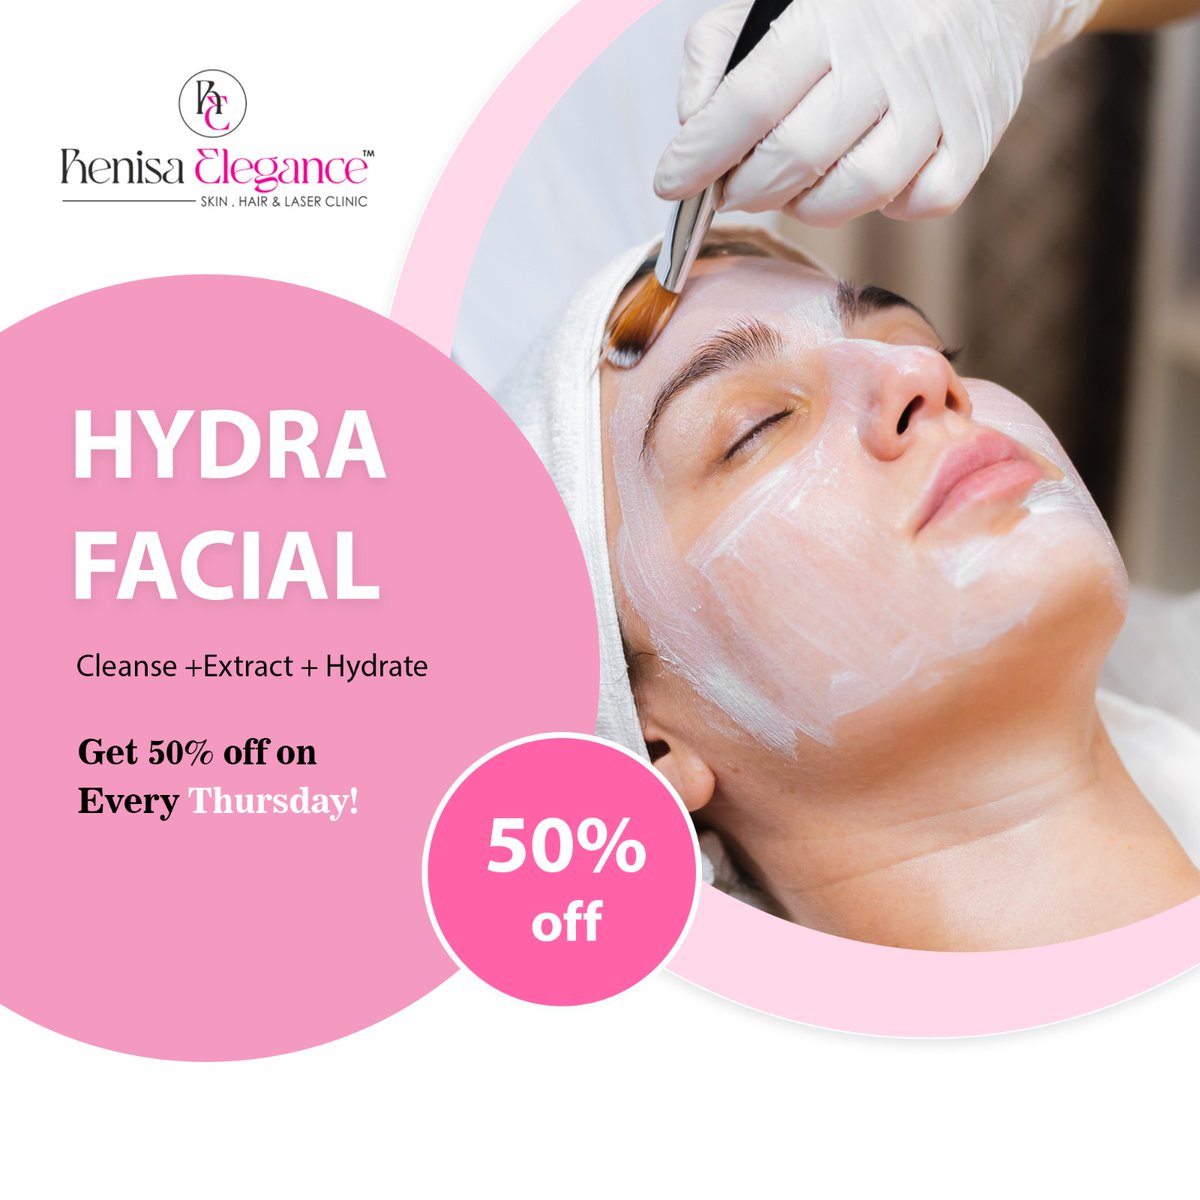 Reveal a radiant and rejuvenated complexion with this advanced skincare procedure. And here's the best part – get 50% off every Thursday! 

#RenisaElegance #SkinClinic #HairClinic #Hydrafacial #BestSkinOfYourLife #RevolutionaryTreatment #CleanseExtractHydrate #RadiantComplexion